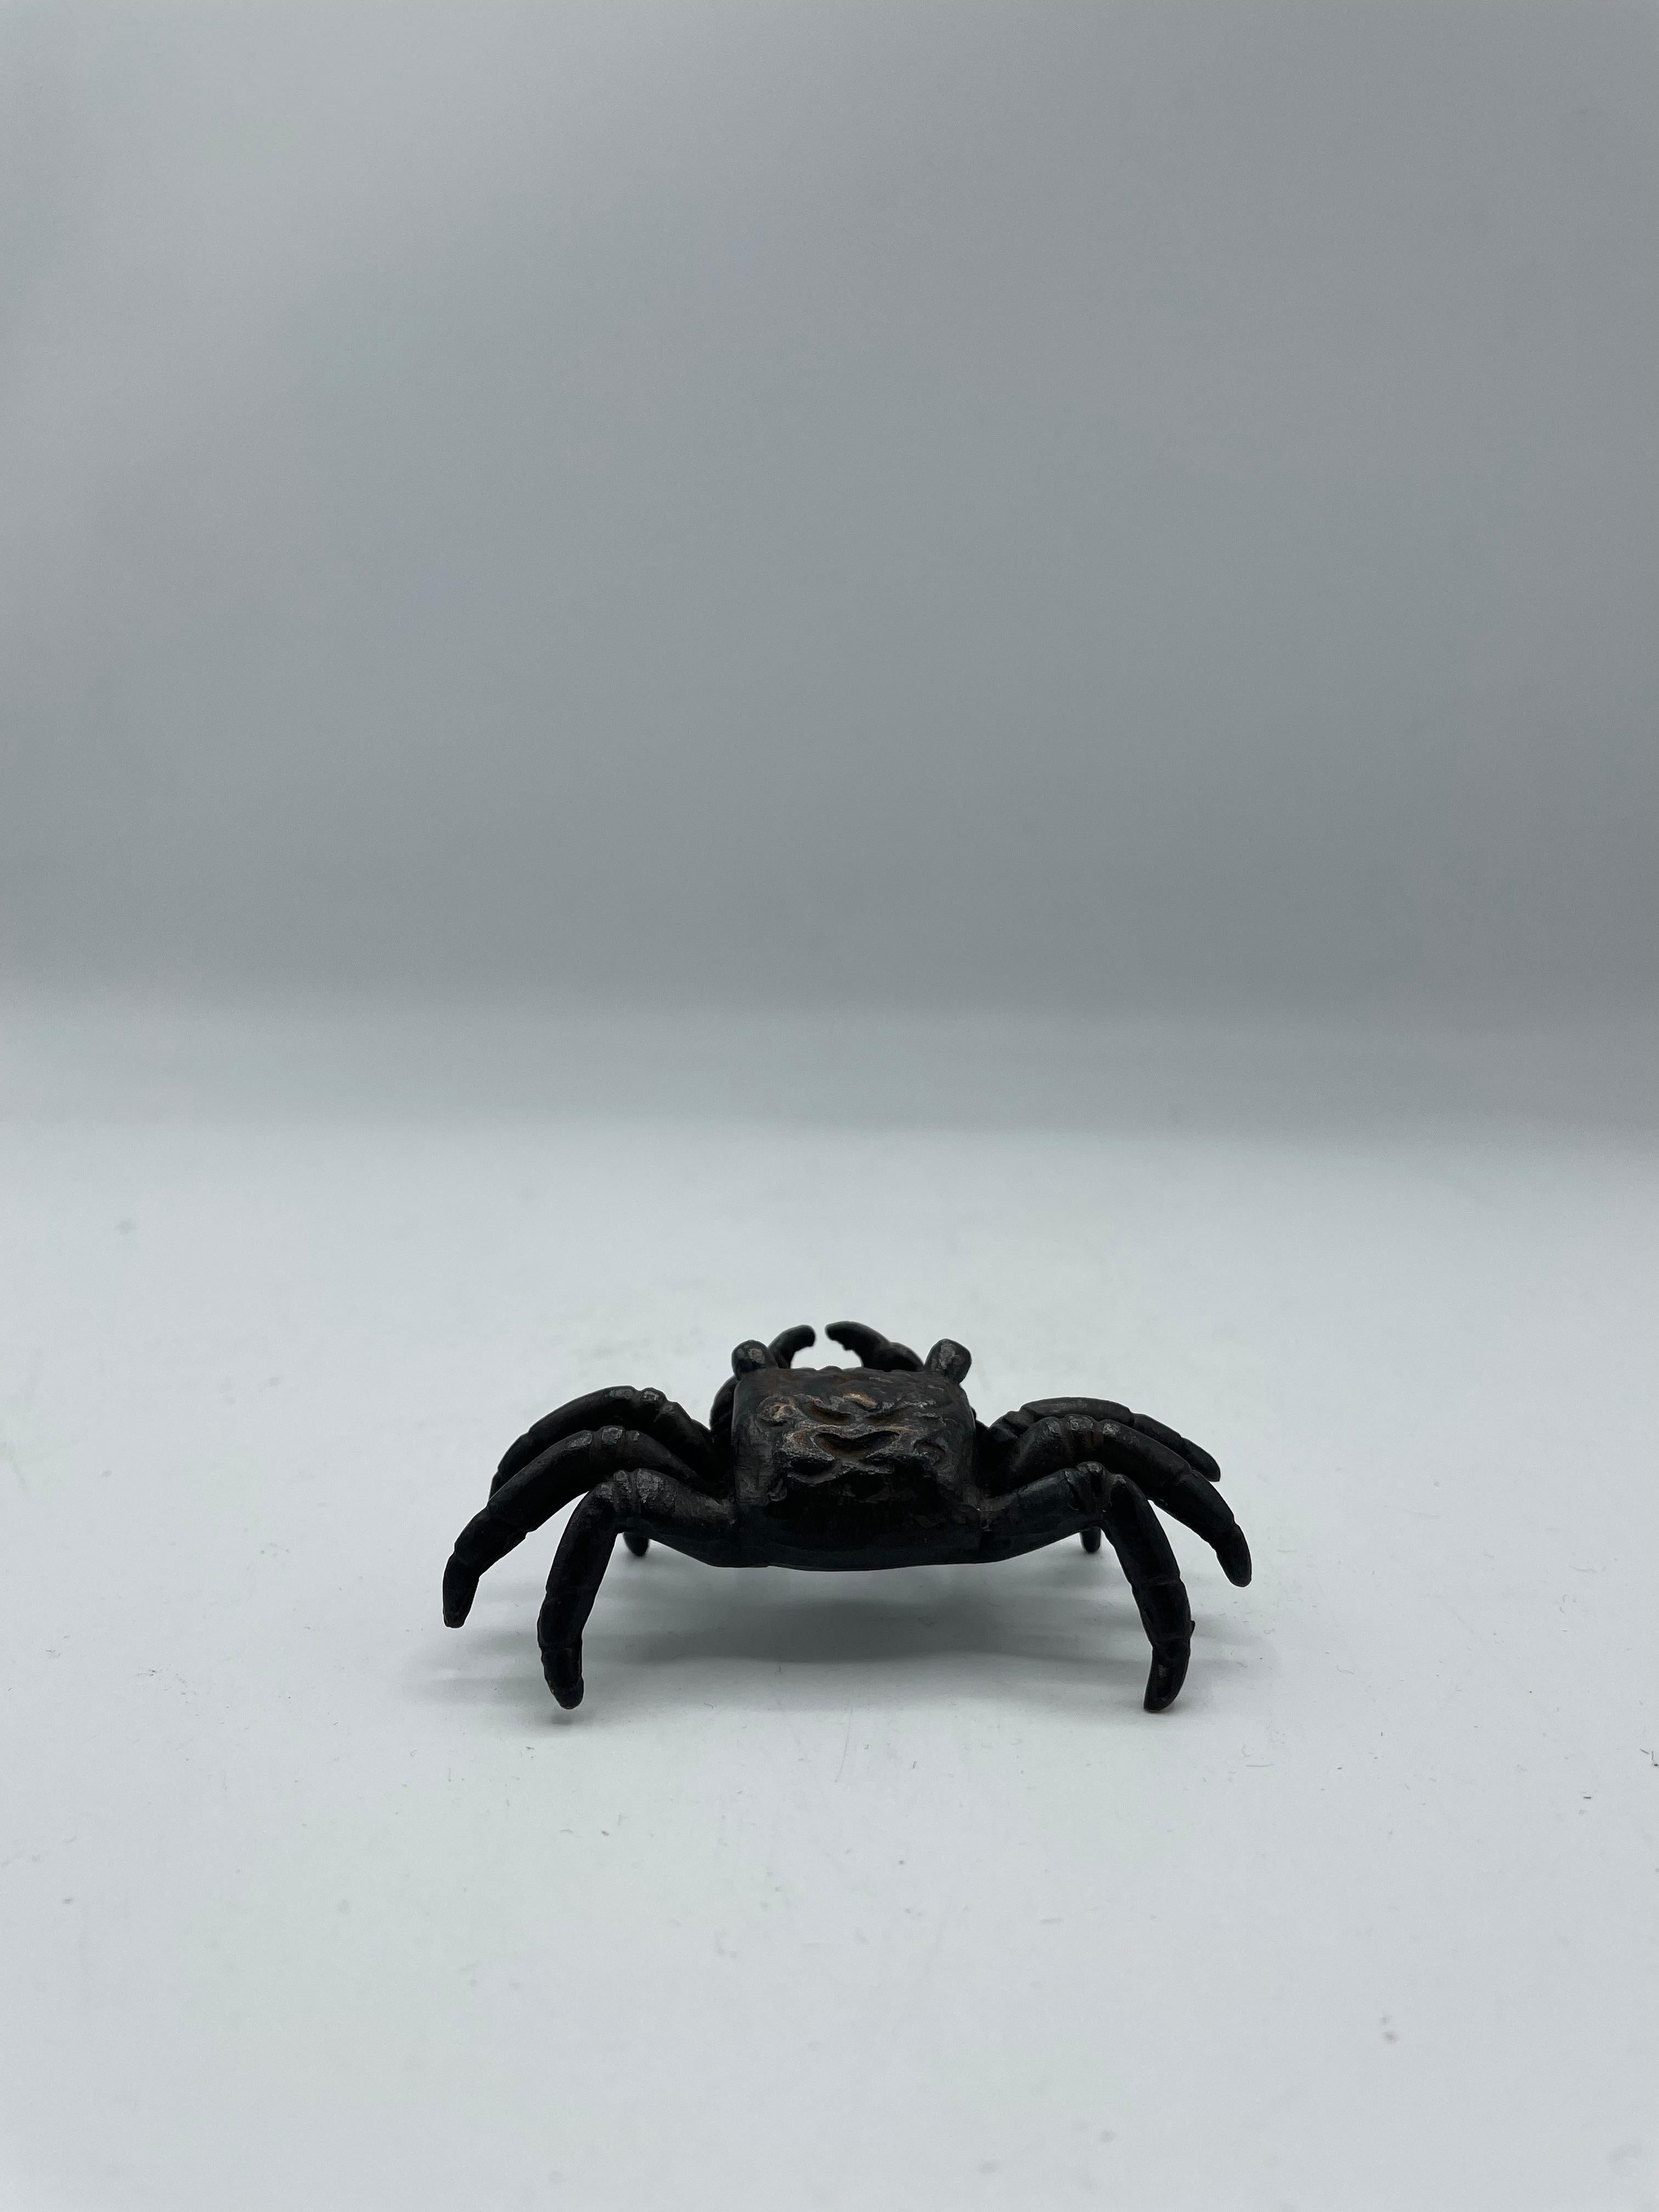 Object of crab with bronze:
A very precious object made before the second world war, when bronze was rare to find.

-Details-
Era: Showa (around 1930-1939)
Materials: Bronze